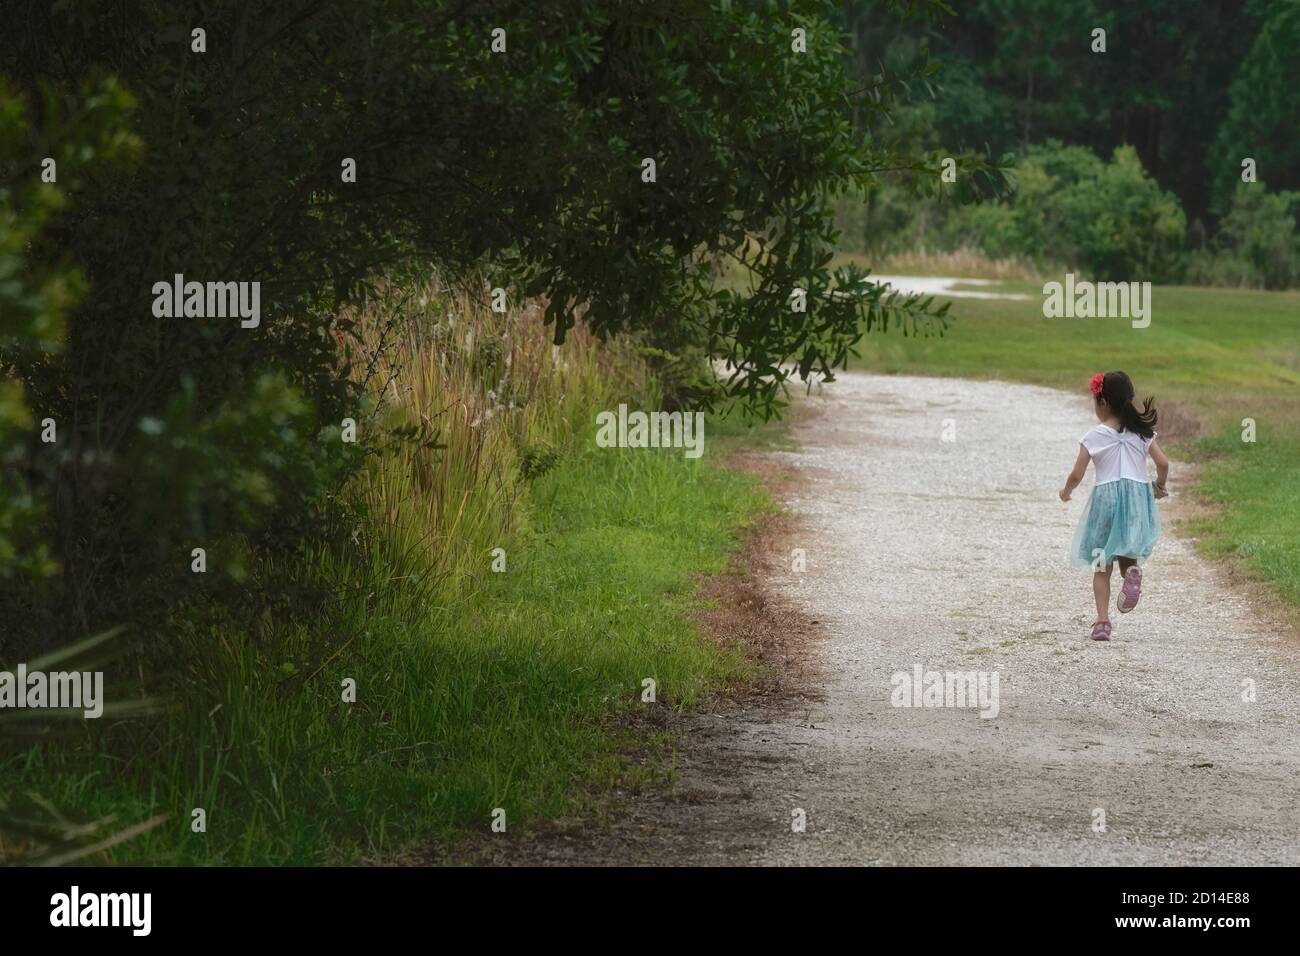 Five year old girl running on a trail. Stock Photo